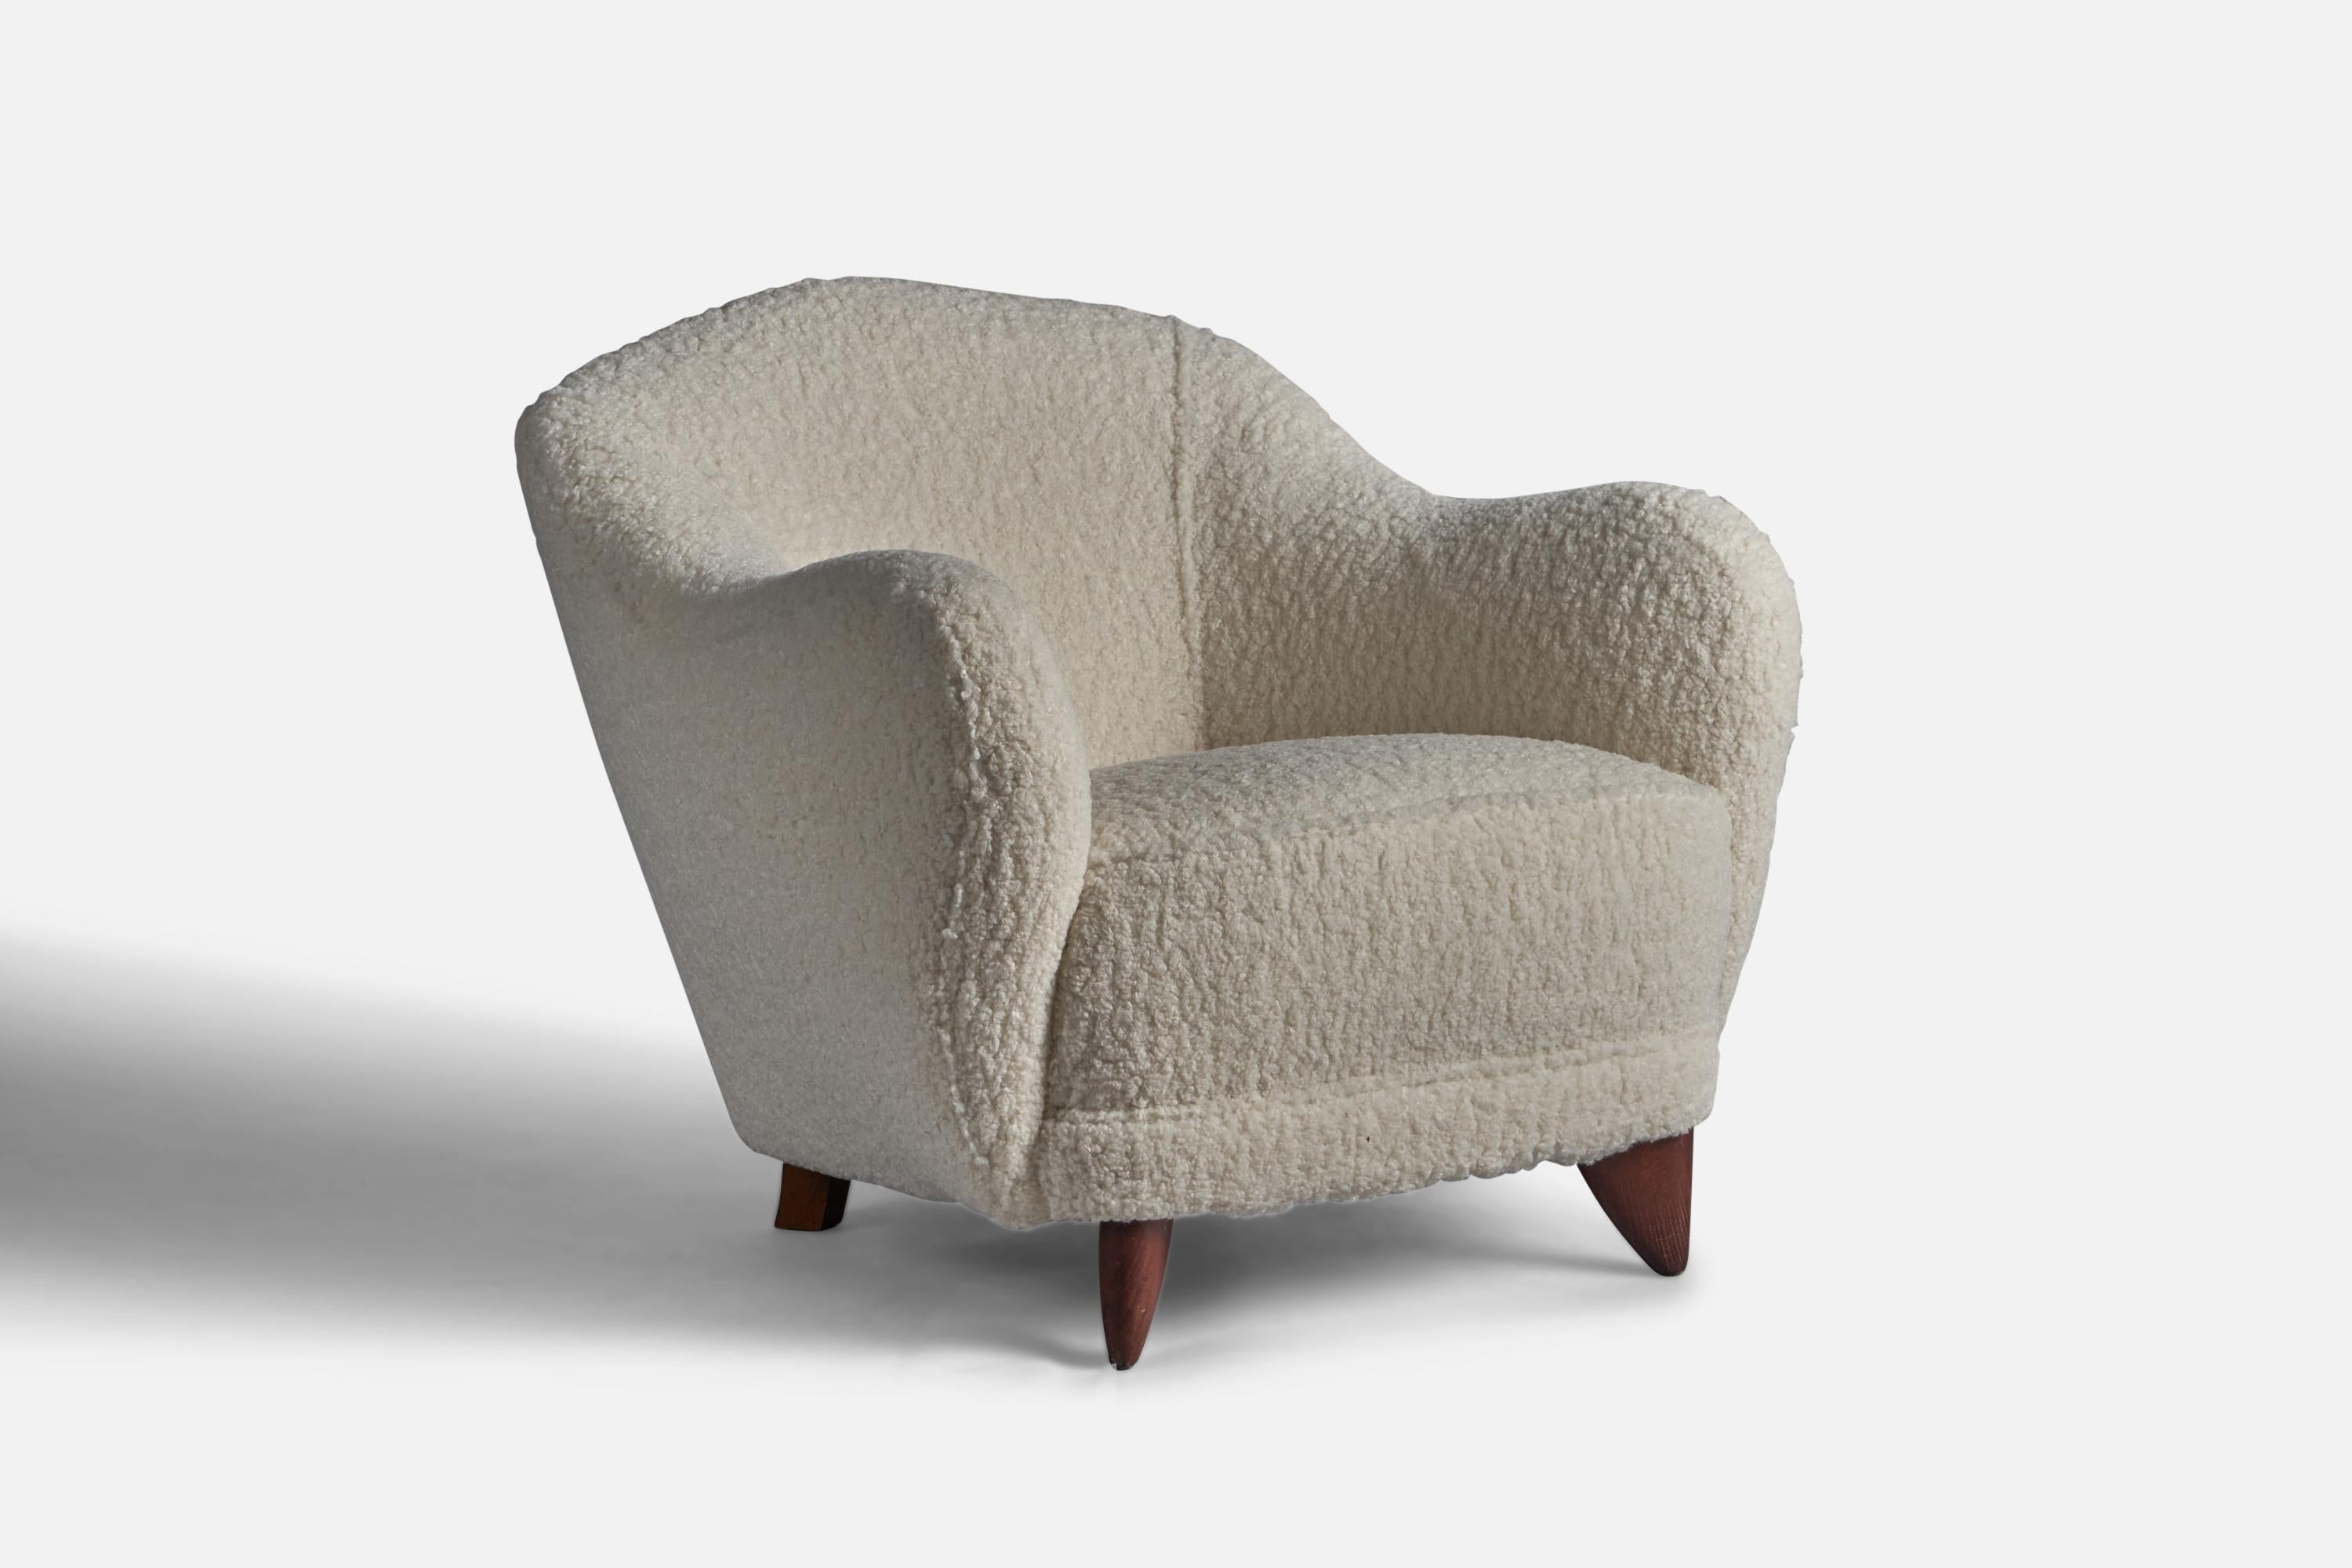 A white bouclé fabric and dark-stained wood lounge chair, designed and produced in Denmark, 1940s.

15